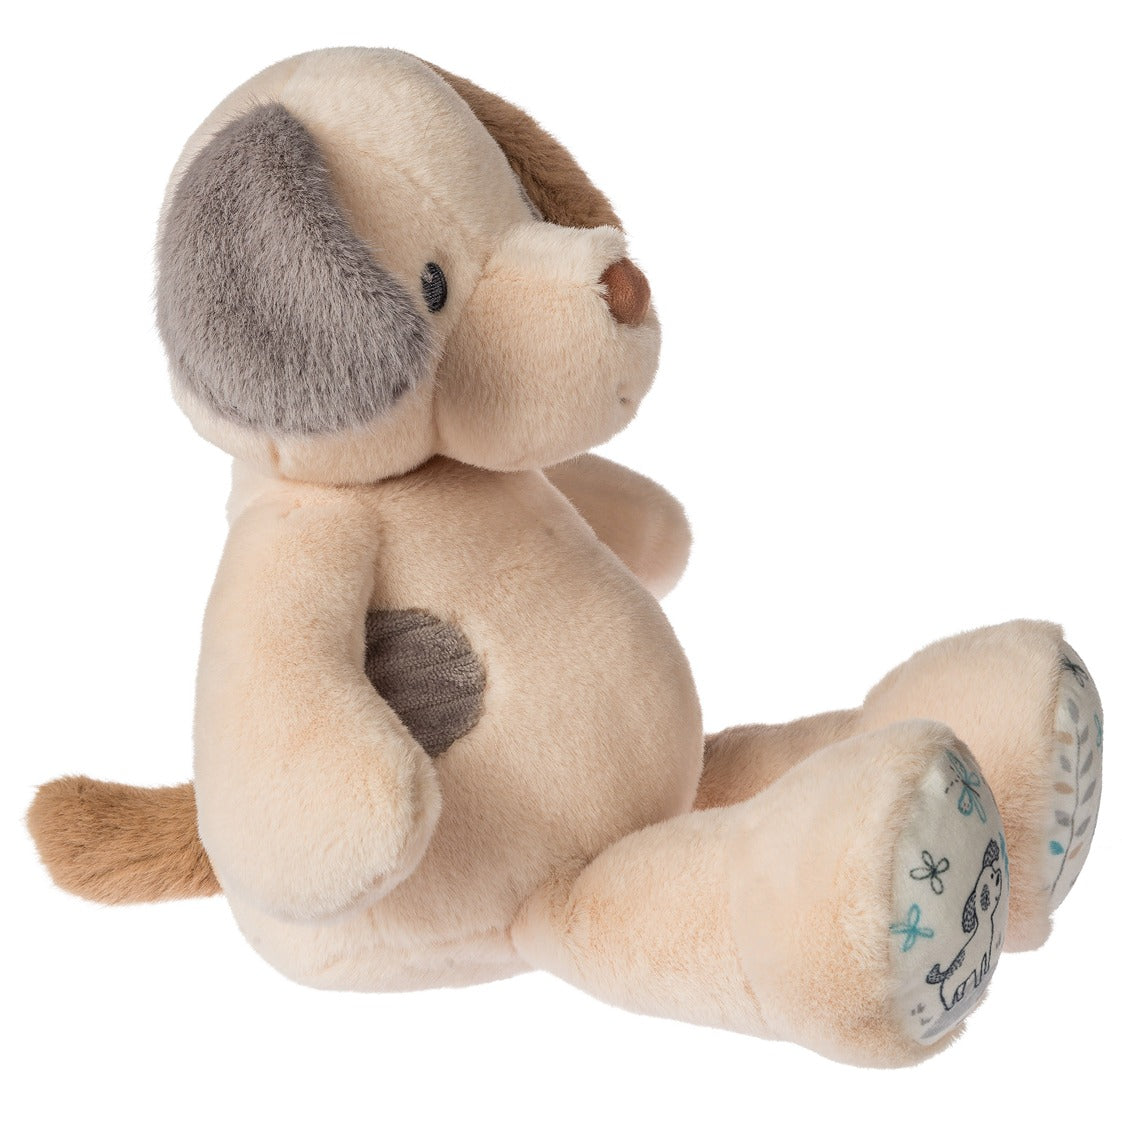 side view of the Puppy Soft Toy displayed against a white background